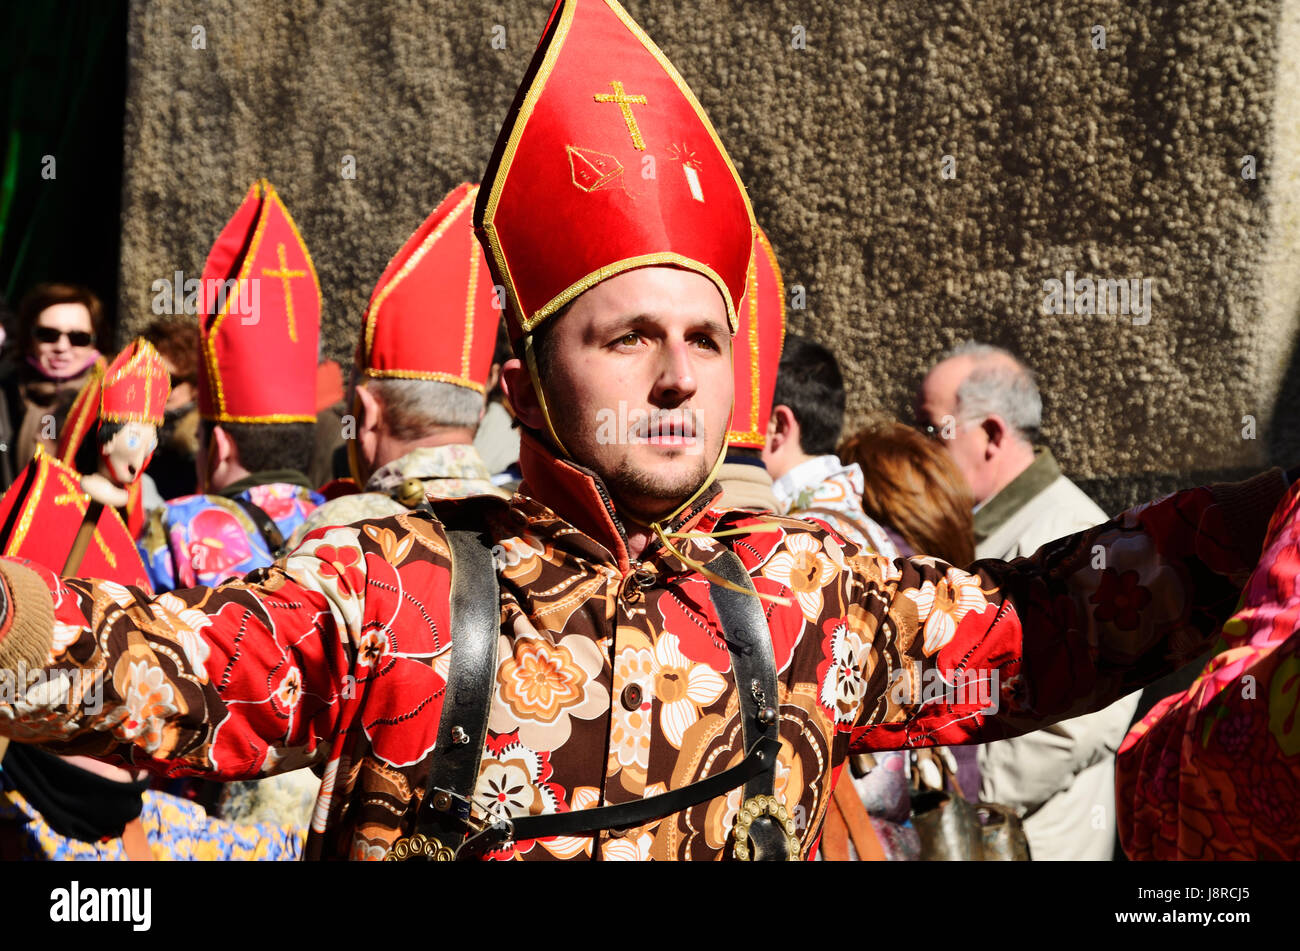 The Endiablada is the name given to a festive immemorial tradition celebrated in Almonacid del Marquesado province of Cuenca, on days 1, 2 and 3 Febru Stock Photo